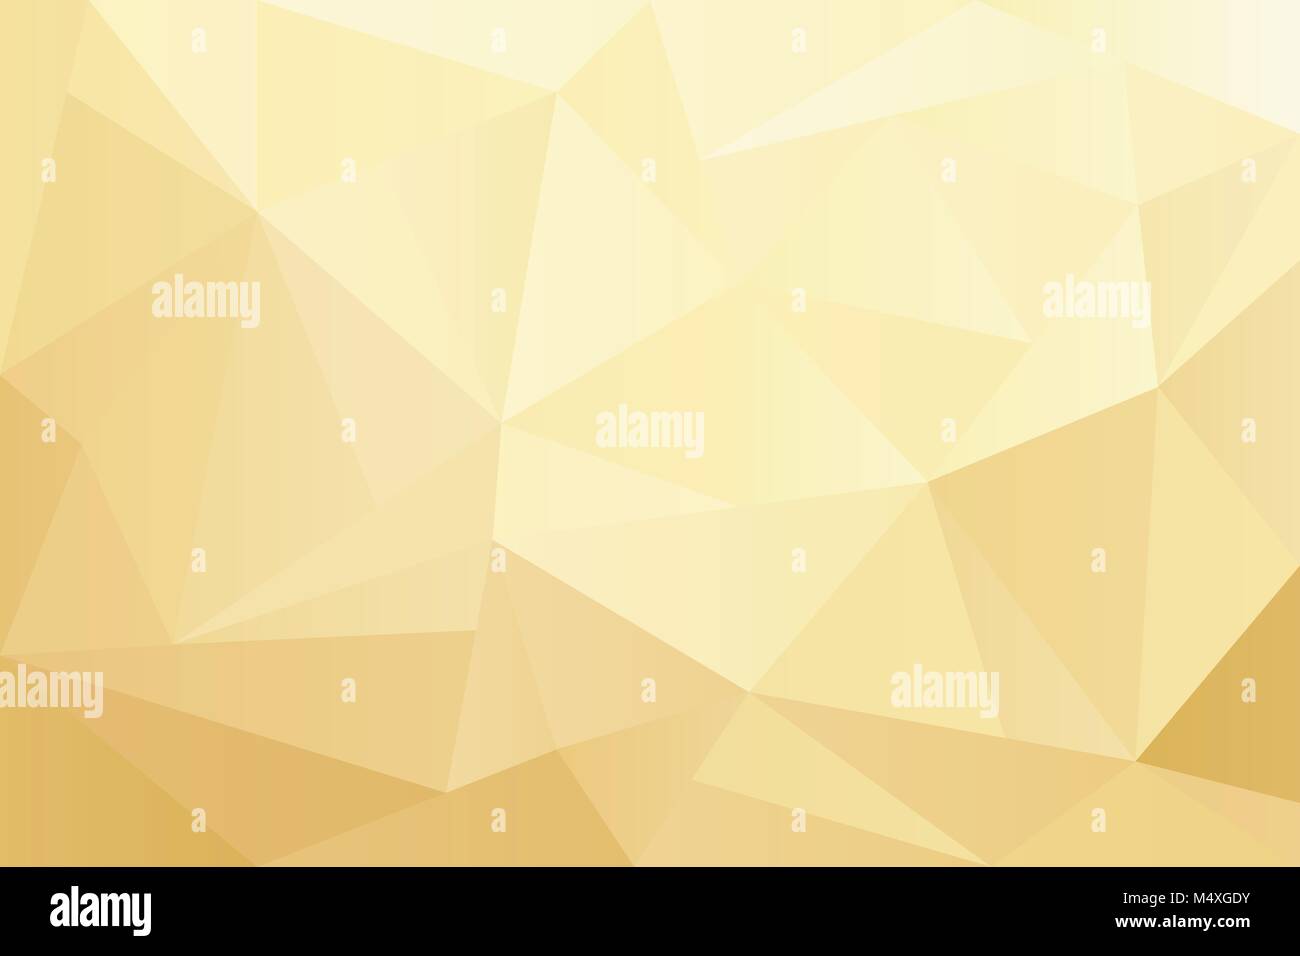 Abstract yellow and gold geometric background with lighting. Vector graphic illustration Stock Vector